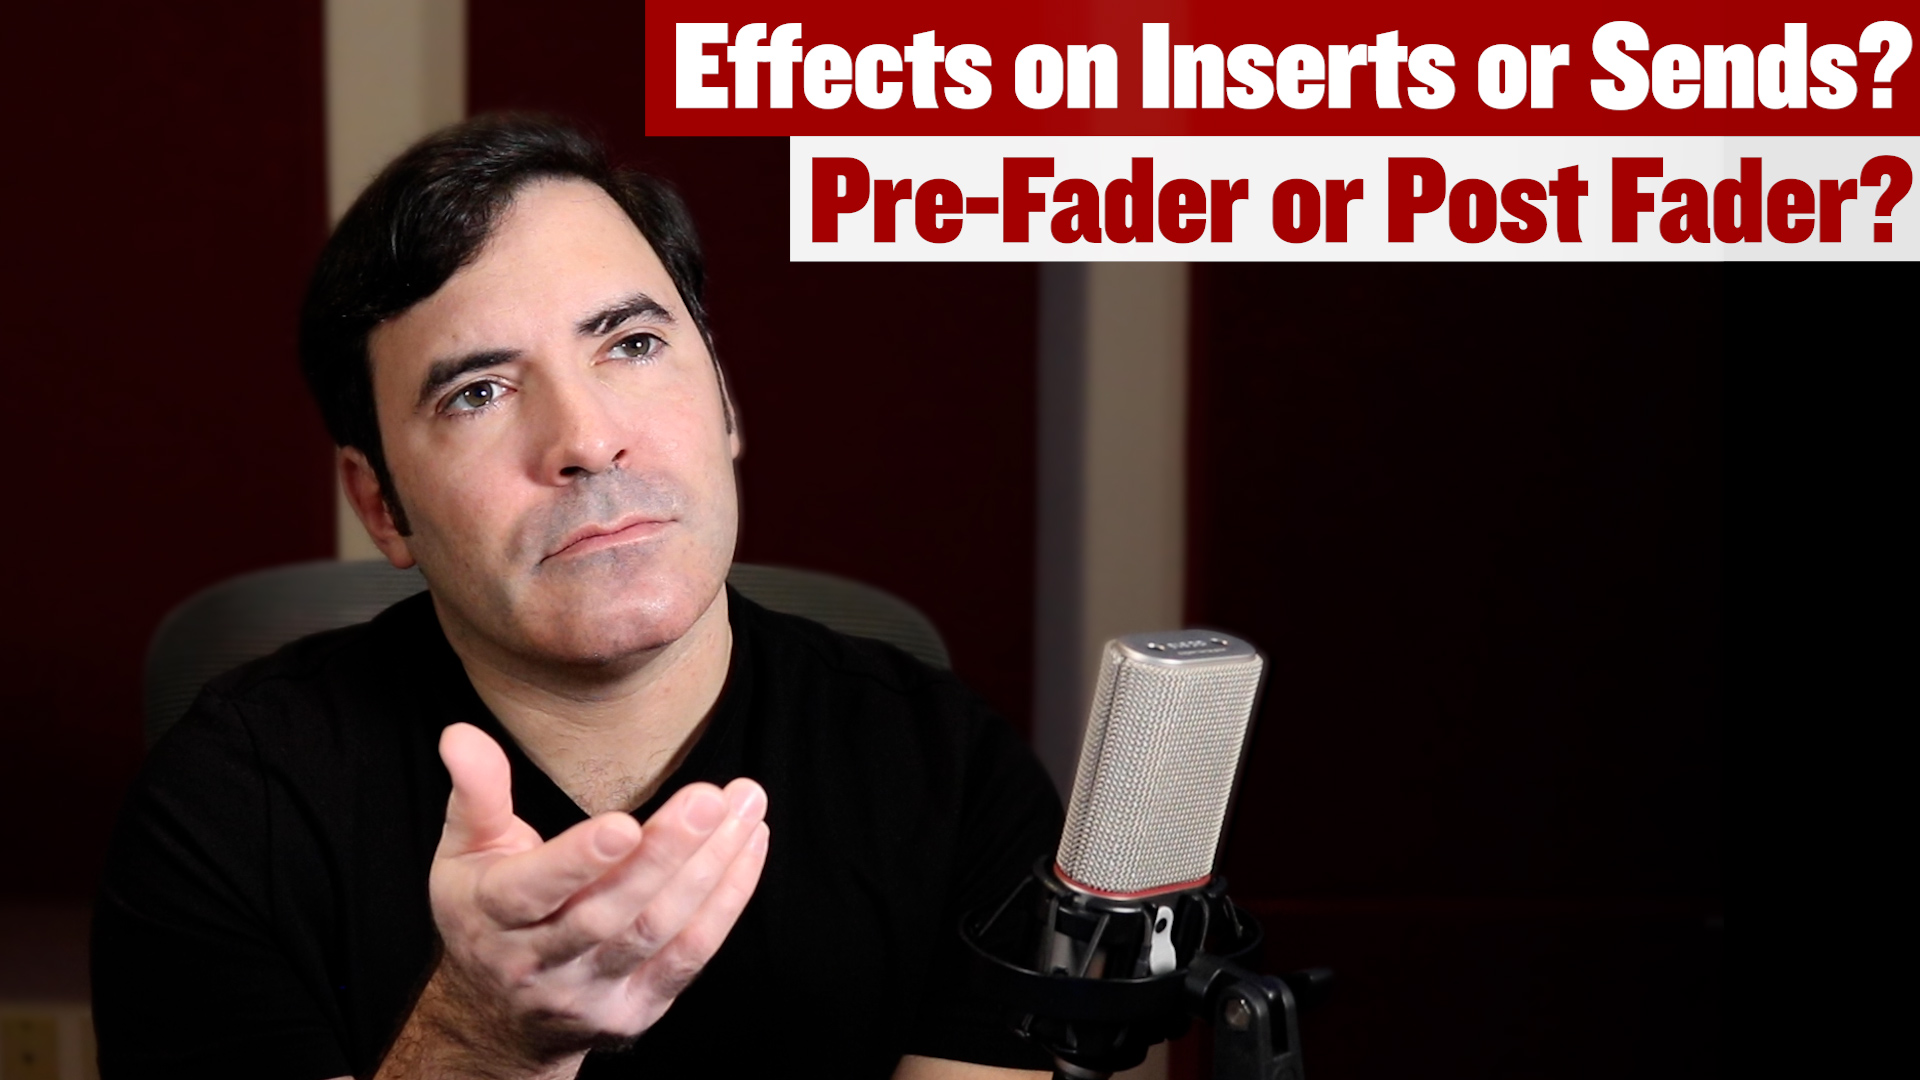 Run Your Reverb & Effects on Inserts or Sends? Pre-Fader or Post-Fader??